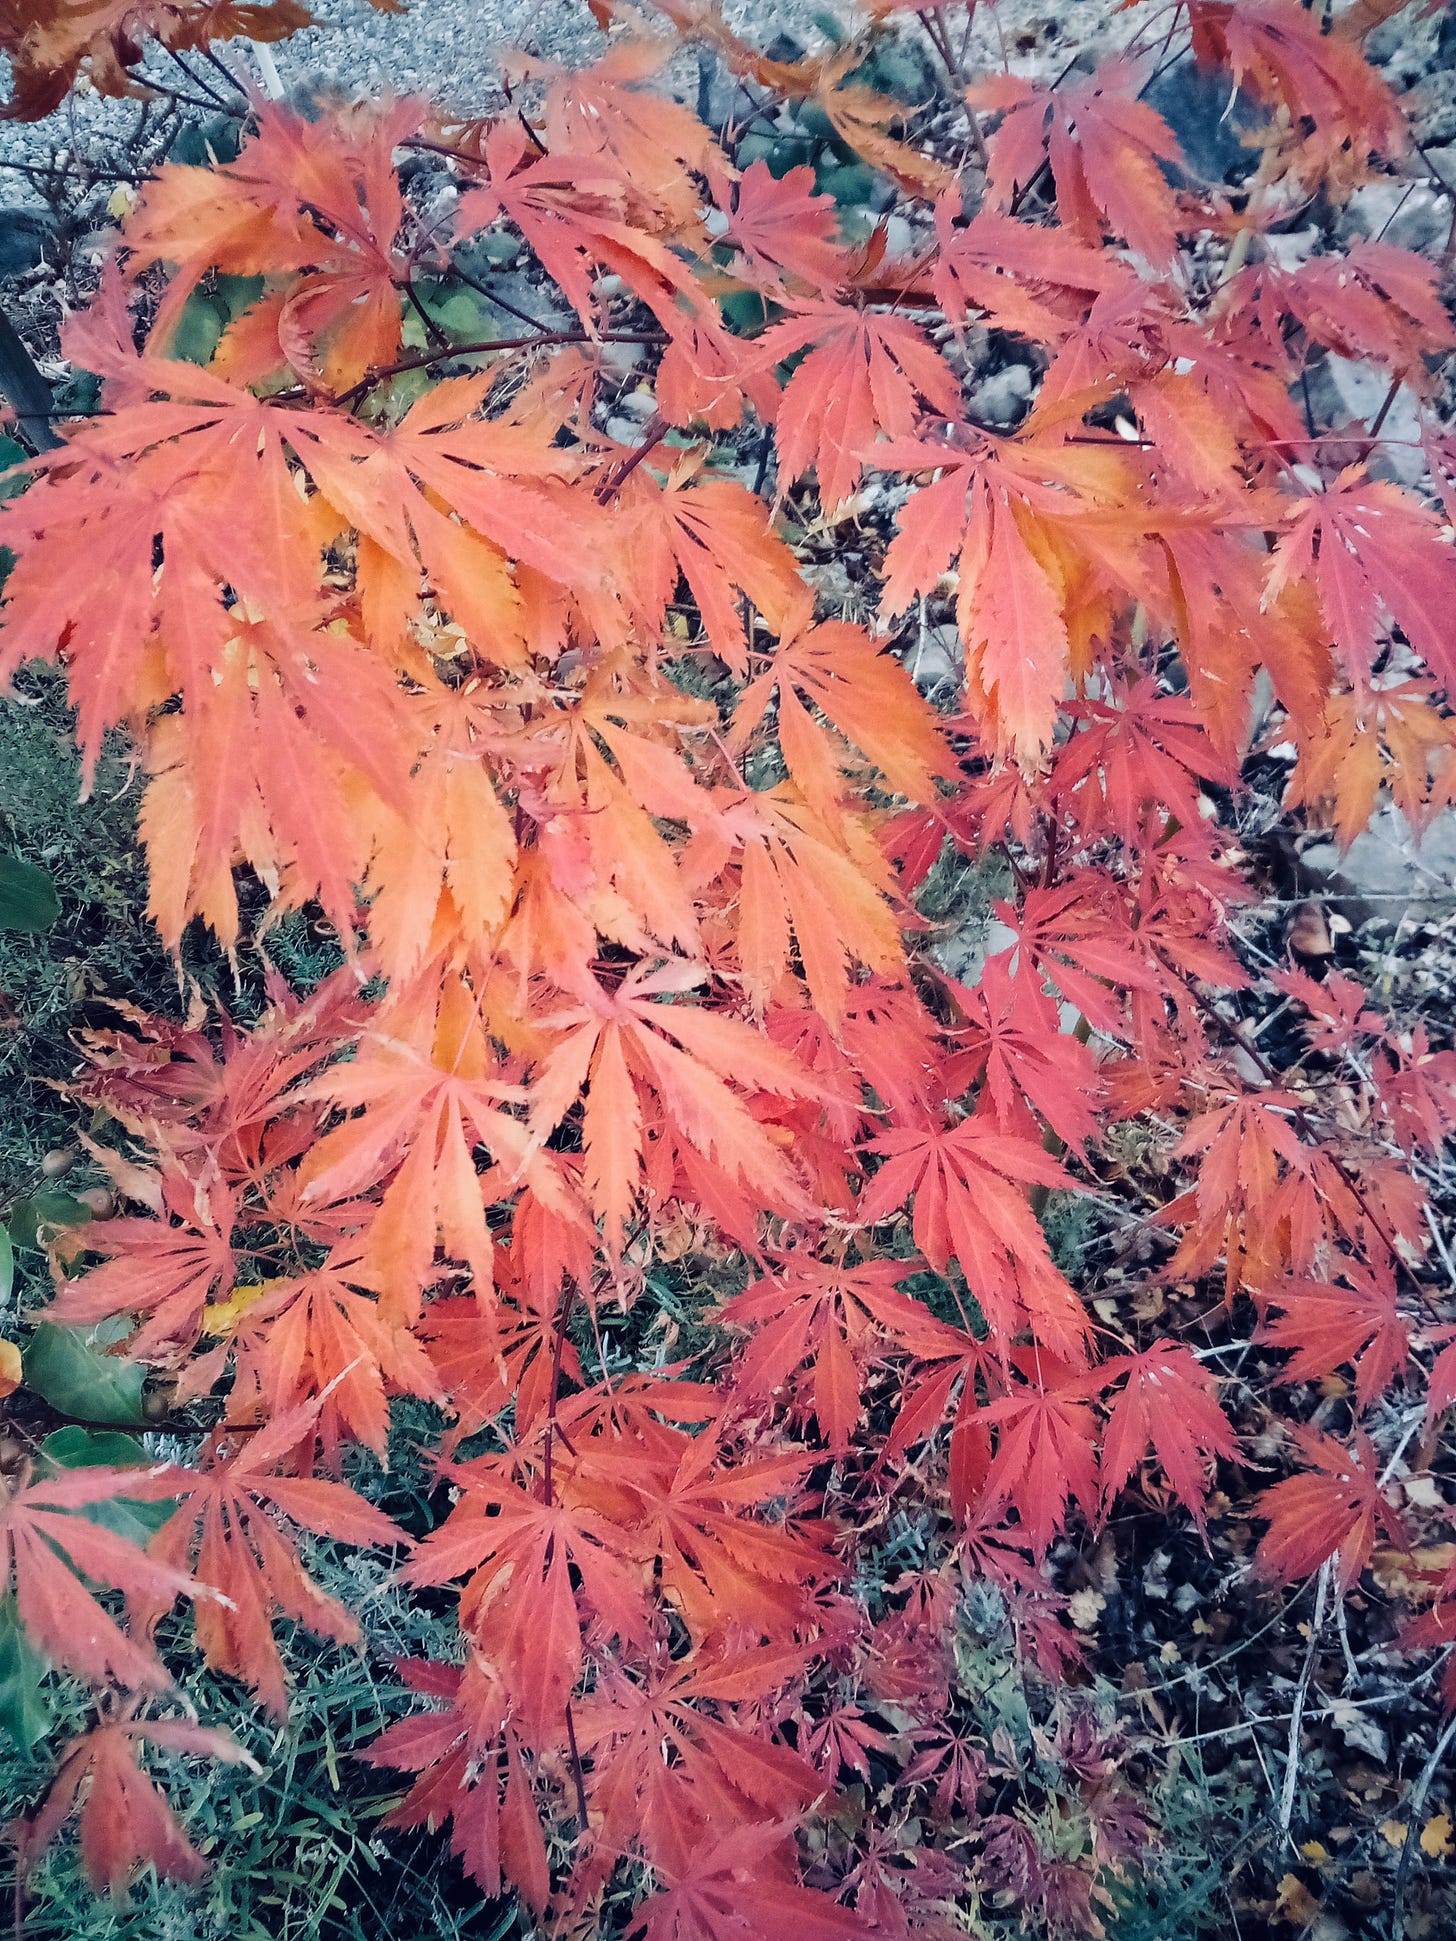 Red maple leaves on a small tree